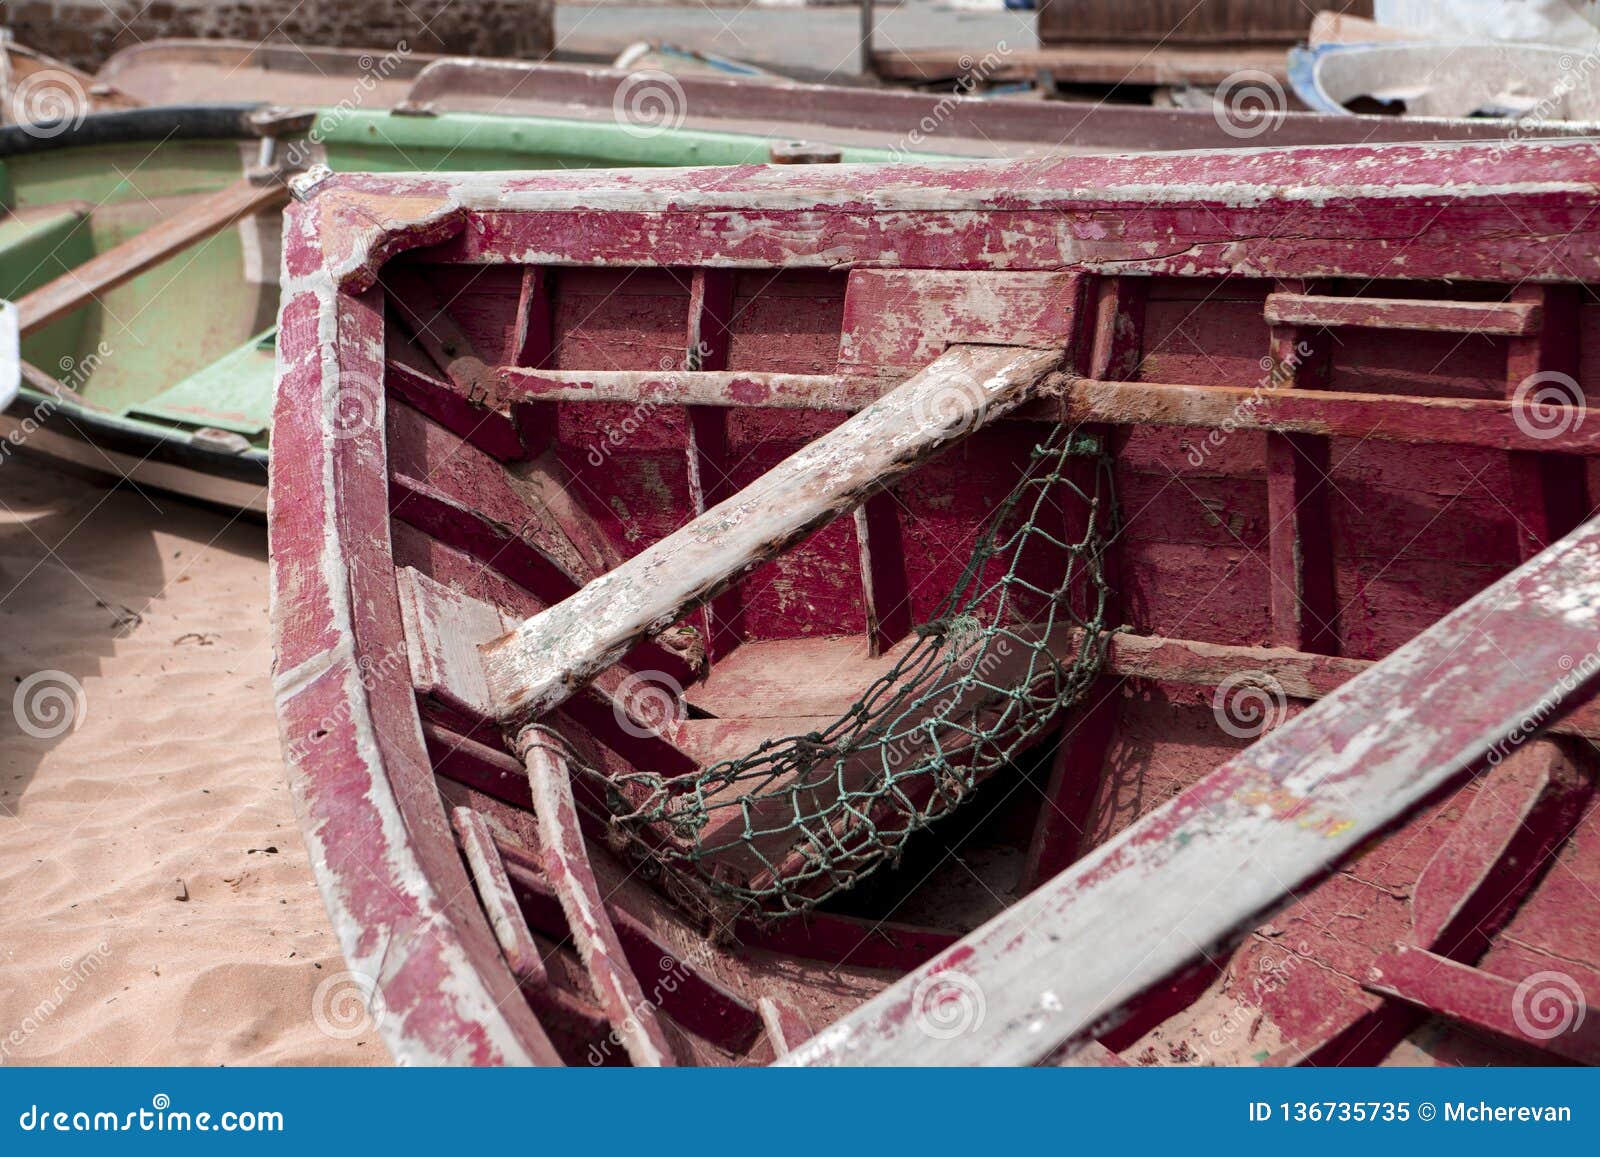 Old Fishing Boat on the Shore. Boat with Nets Waiting for